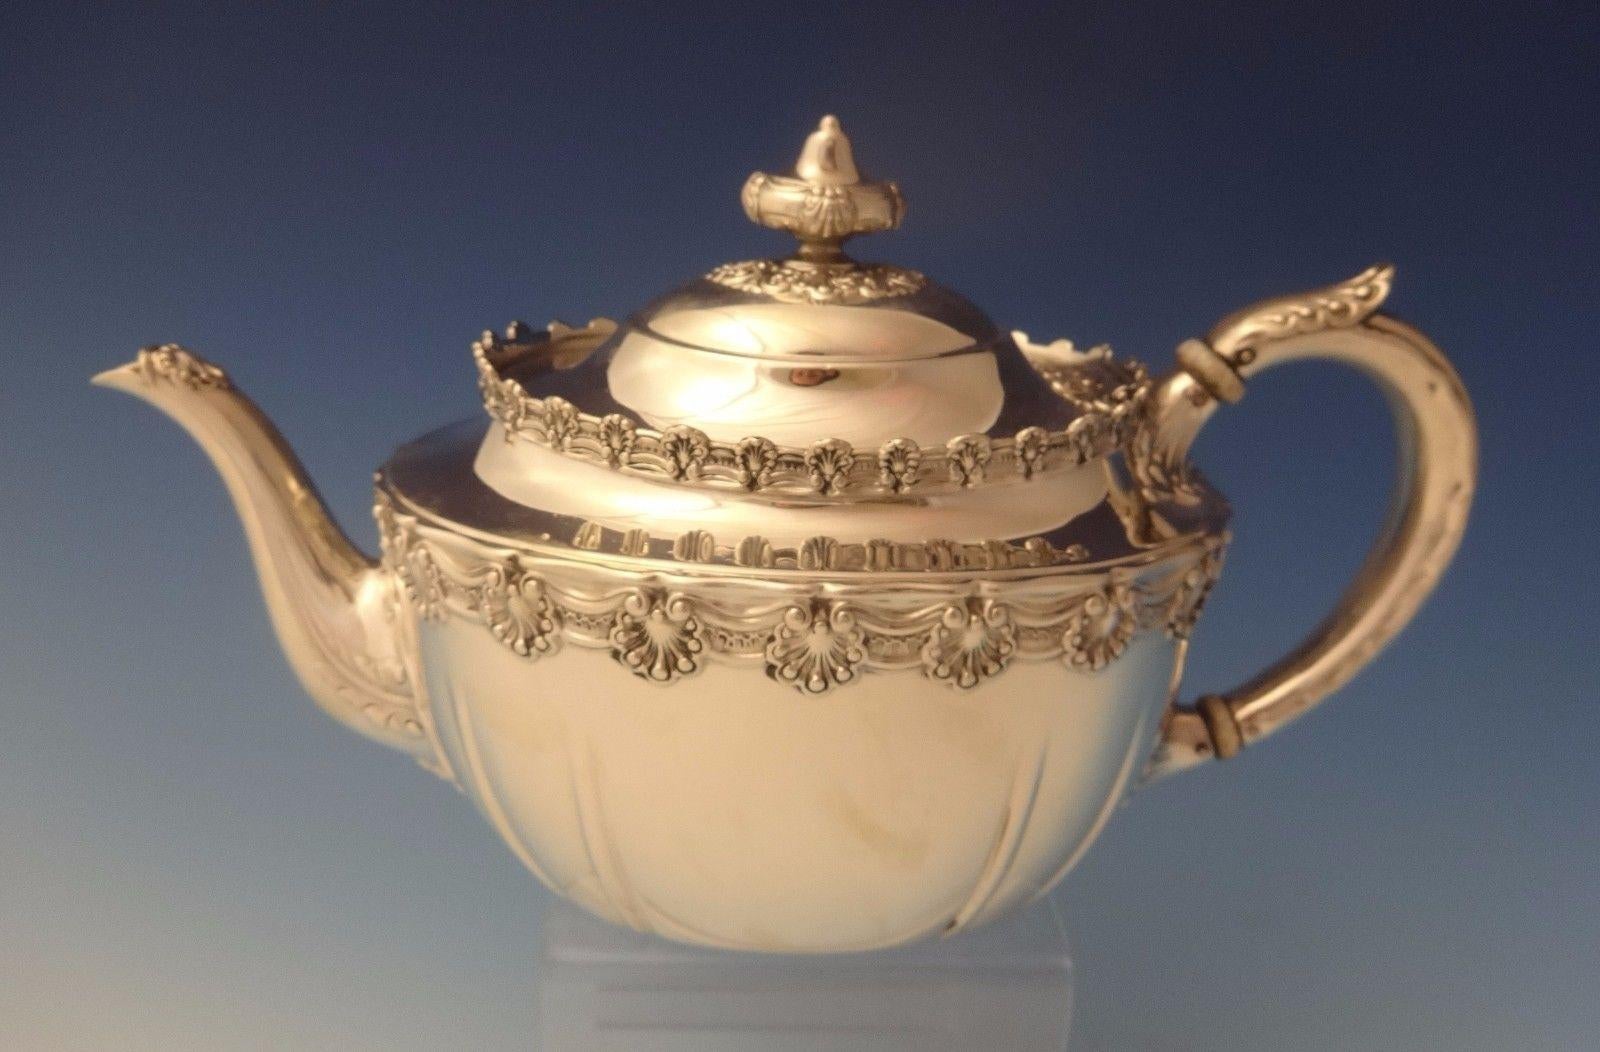 English King by Tiffany & Co. English King by Tiffany & Co. 3-piece sterling tea set. The pieces are marked with a T date letter for 1892-1902 and #9579/5465. The pattern features a border of detailed shells. The set includes:
Tea pot: Holds 2 1/2